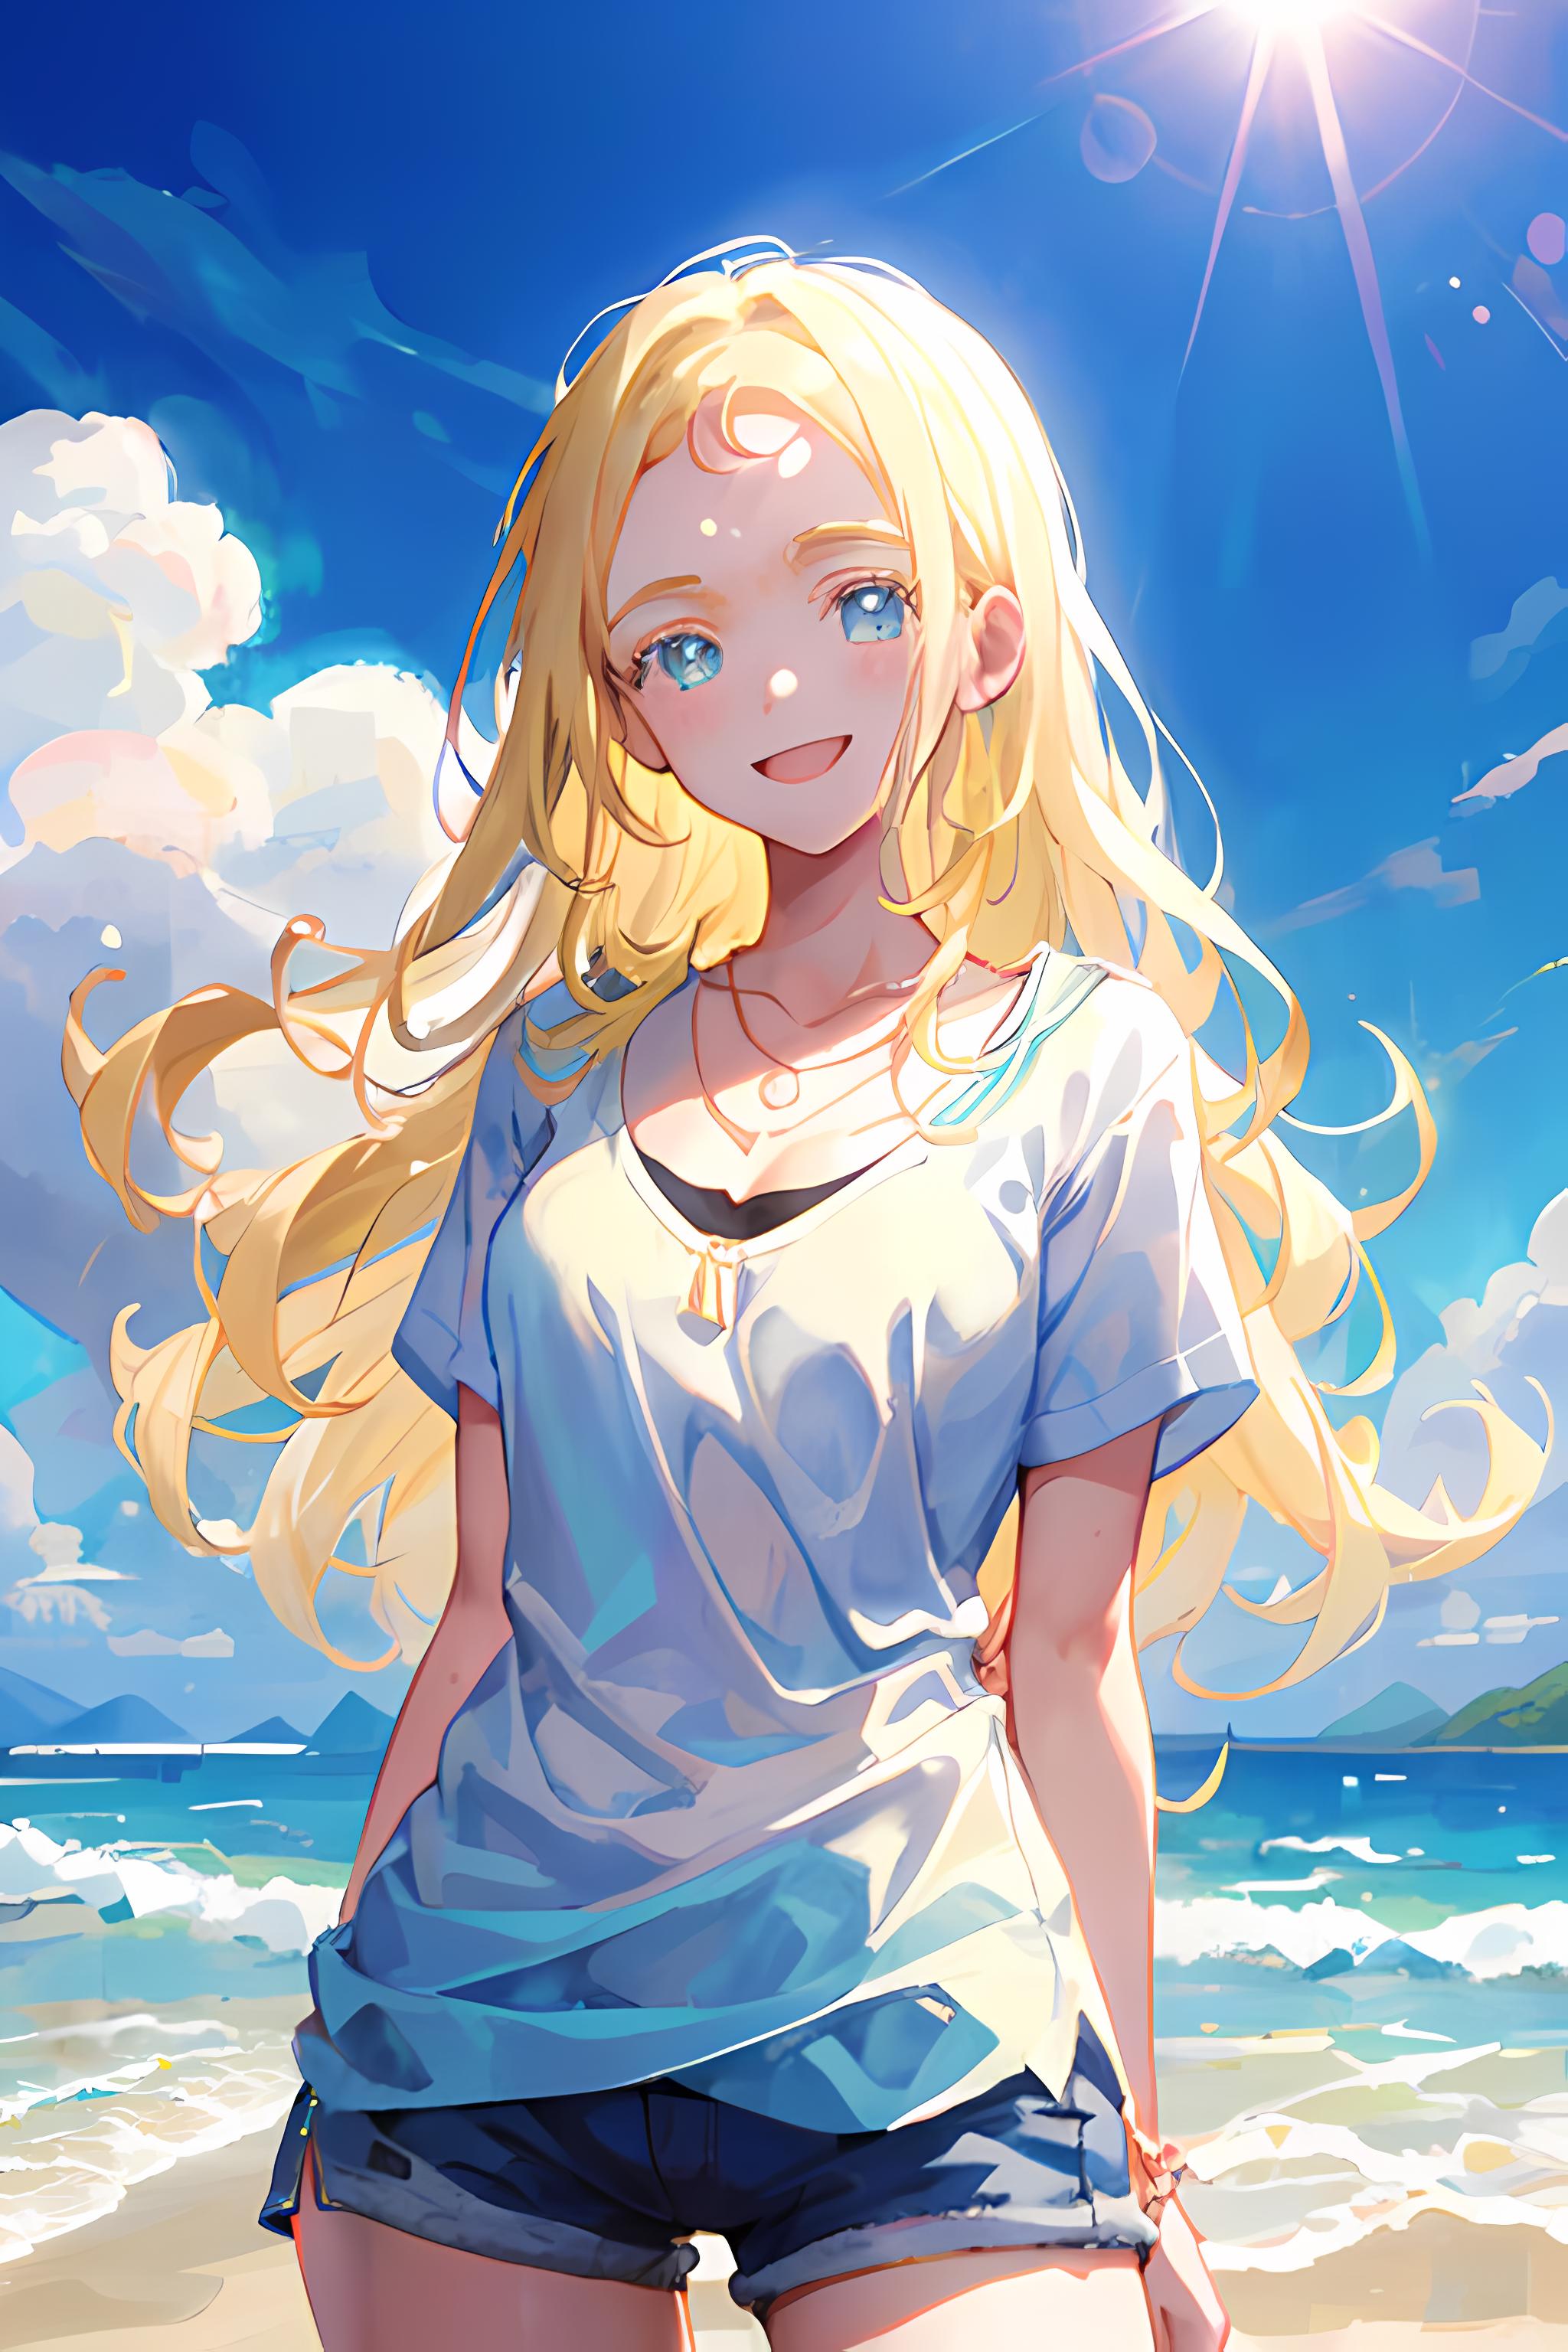 "A Blonde Woman in a White Shirt with Blue Eyes Smiling on a Sunny Day by the Ocean"